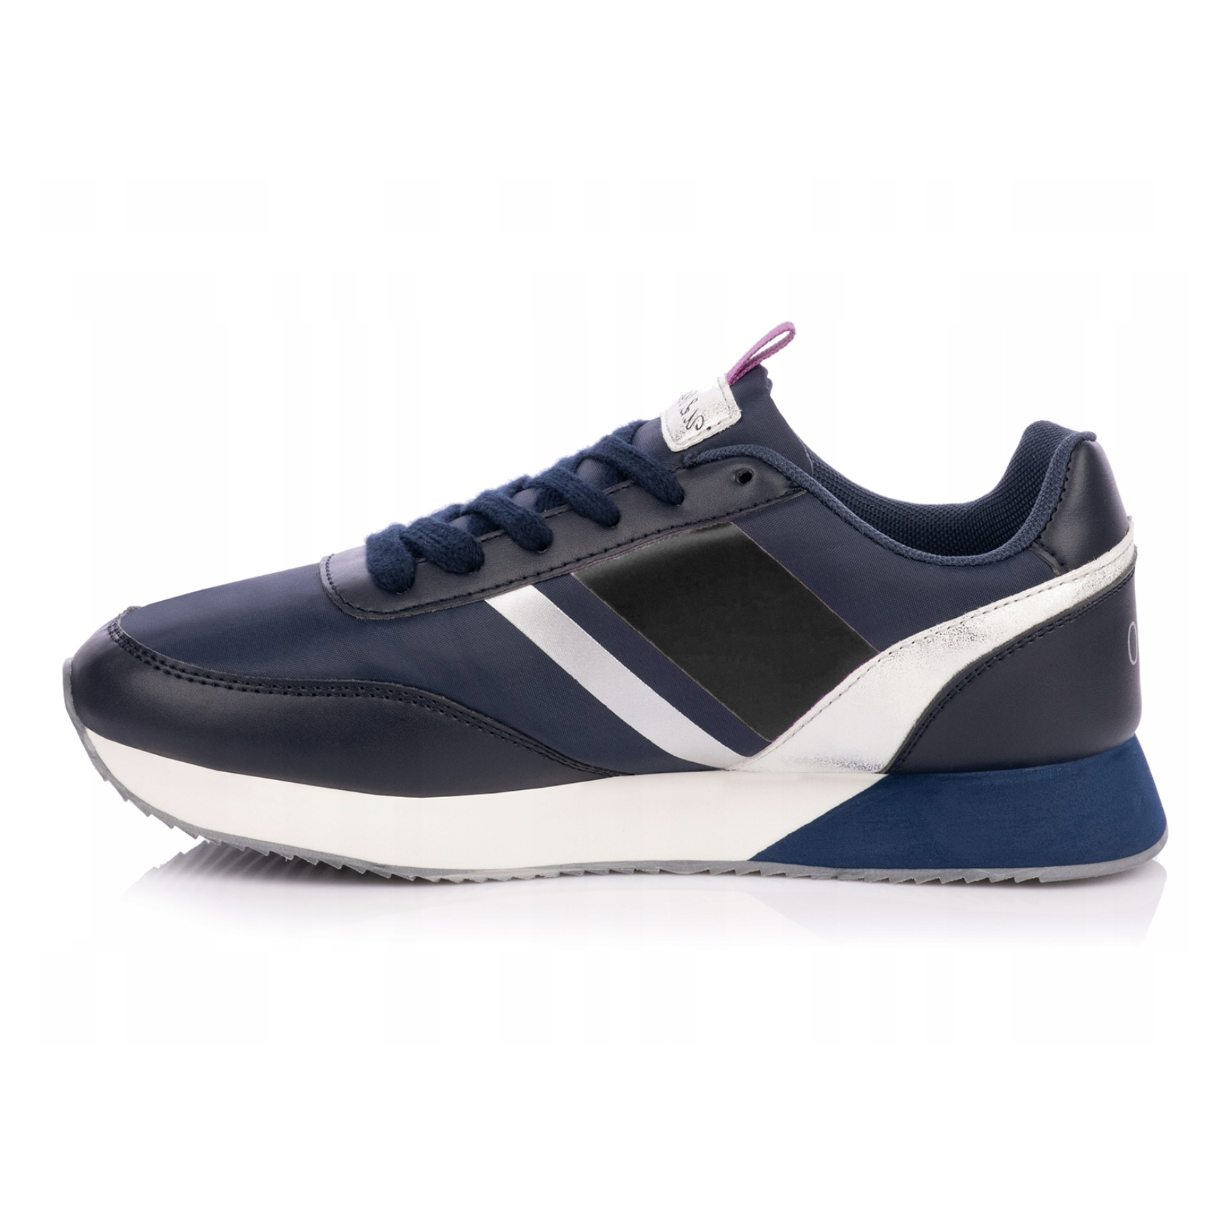 Chic Blue & Silver Eco-Friendly Sneakers